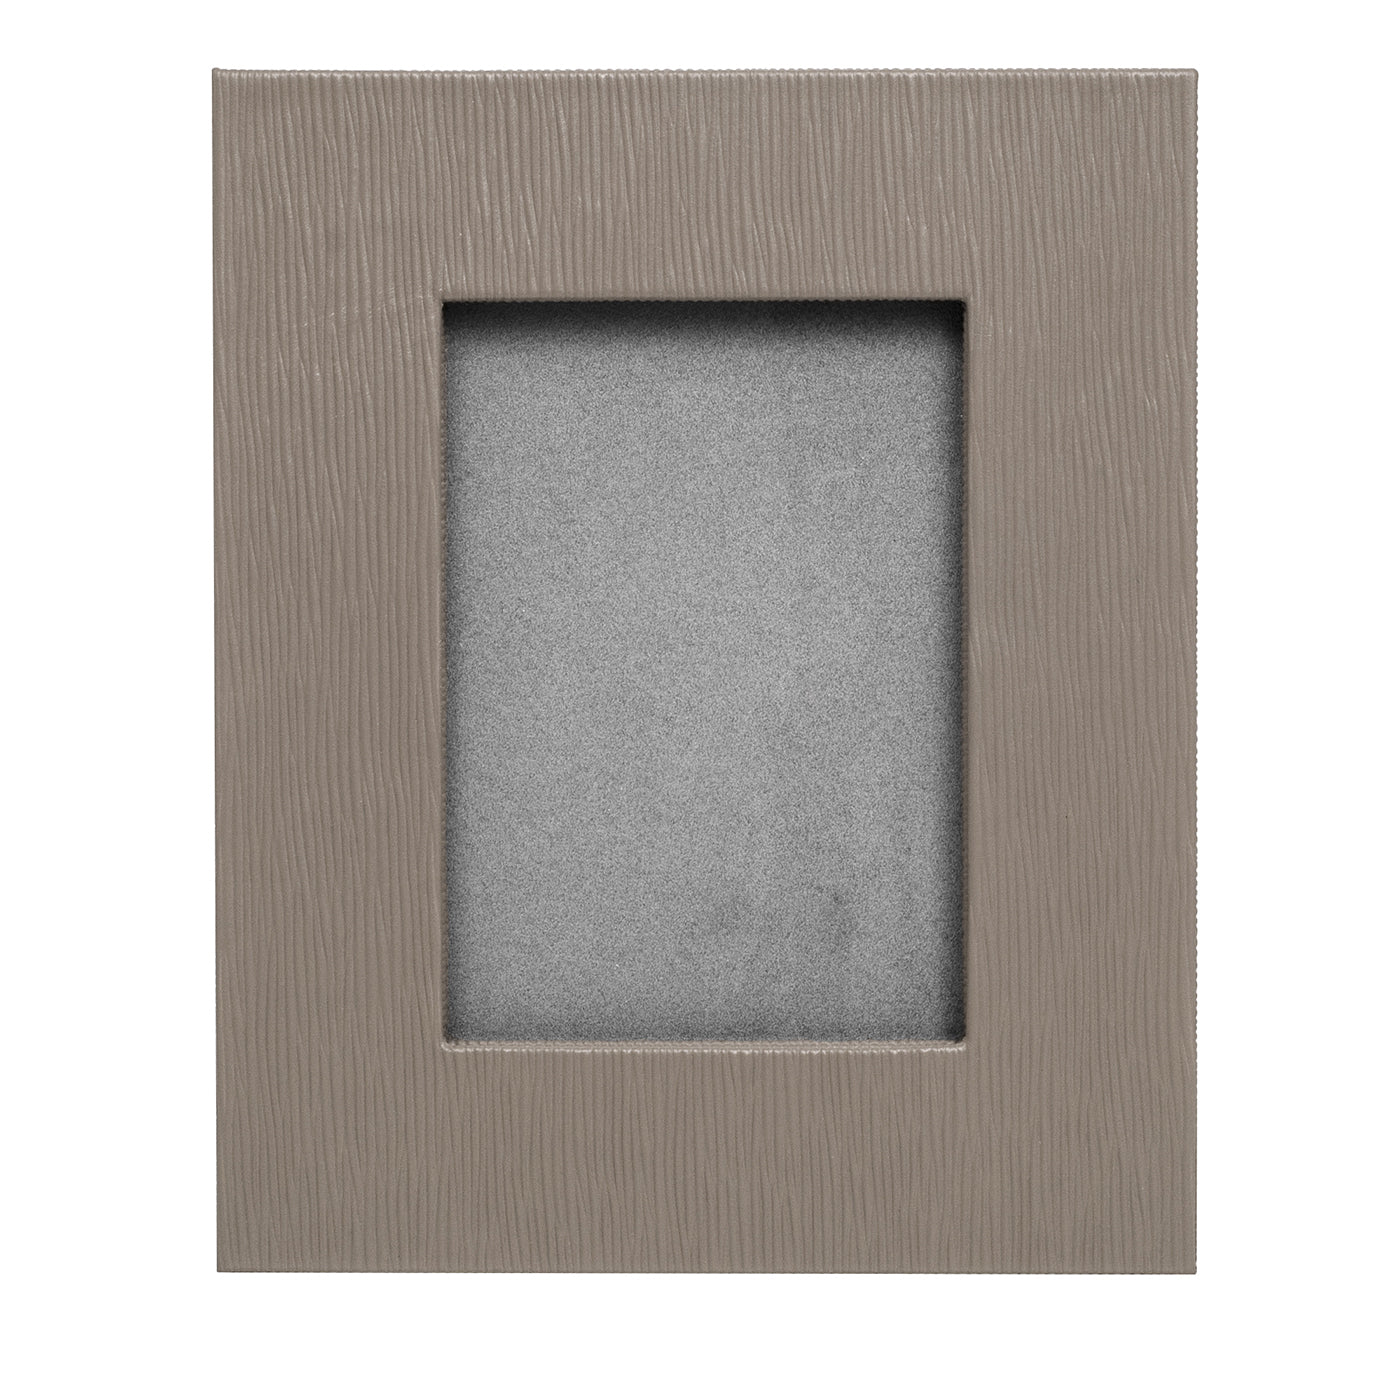 Small Rectangular Taupe Leather Frame - Main view